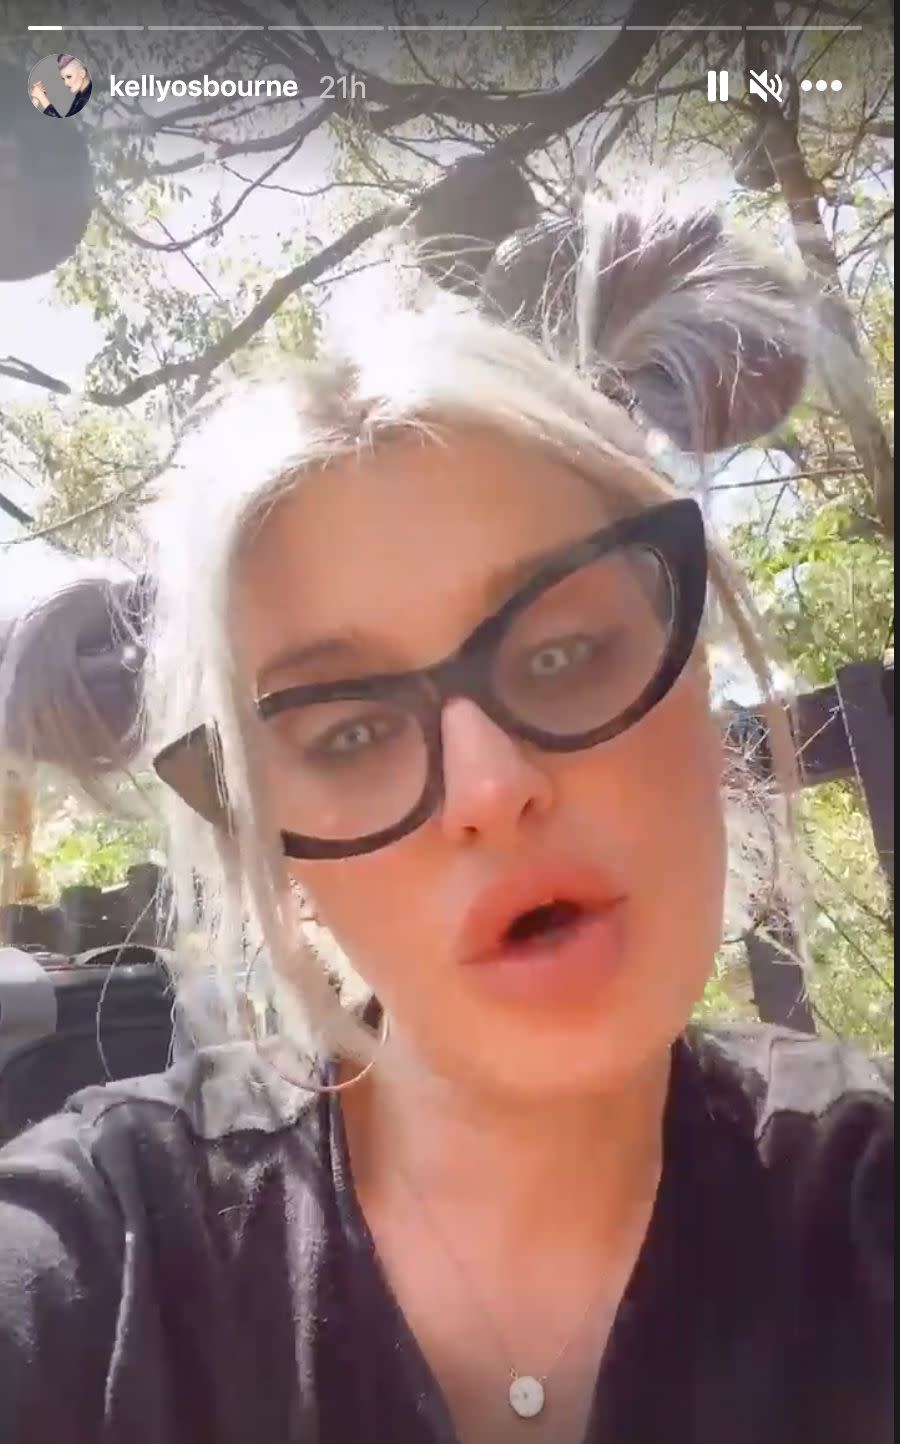 Kelly Osbourne said she always wants to be honest with fans about "where I&rsquo;m at and what&rsquo;s going on in my road to recovery." (Photo: Instagram)